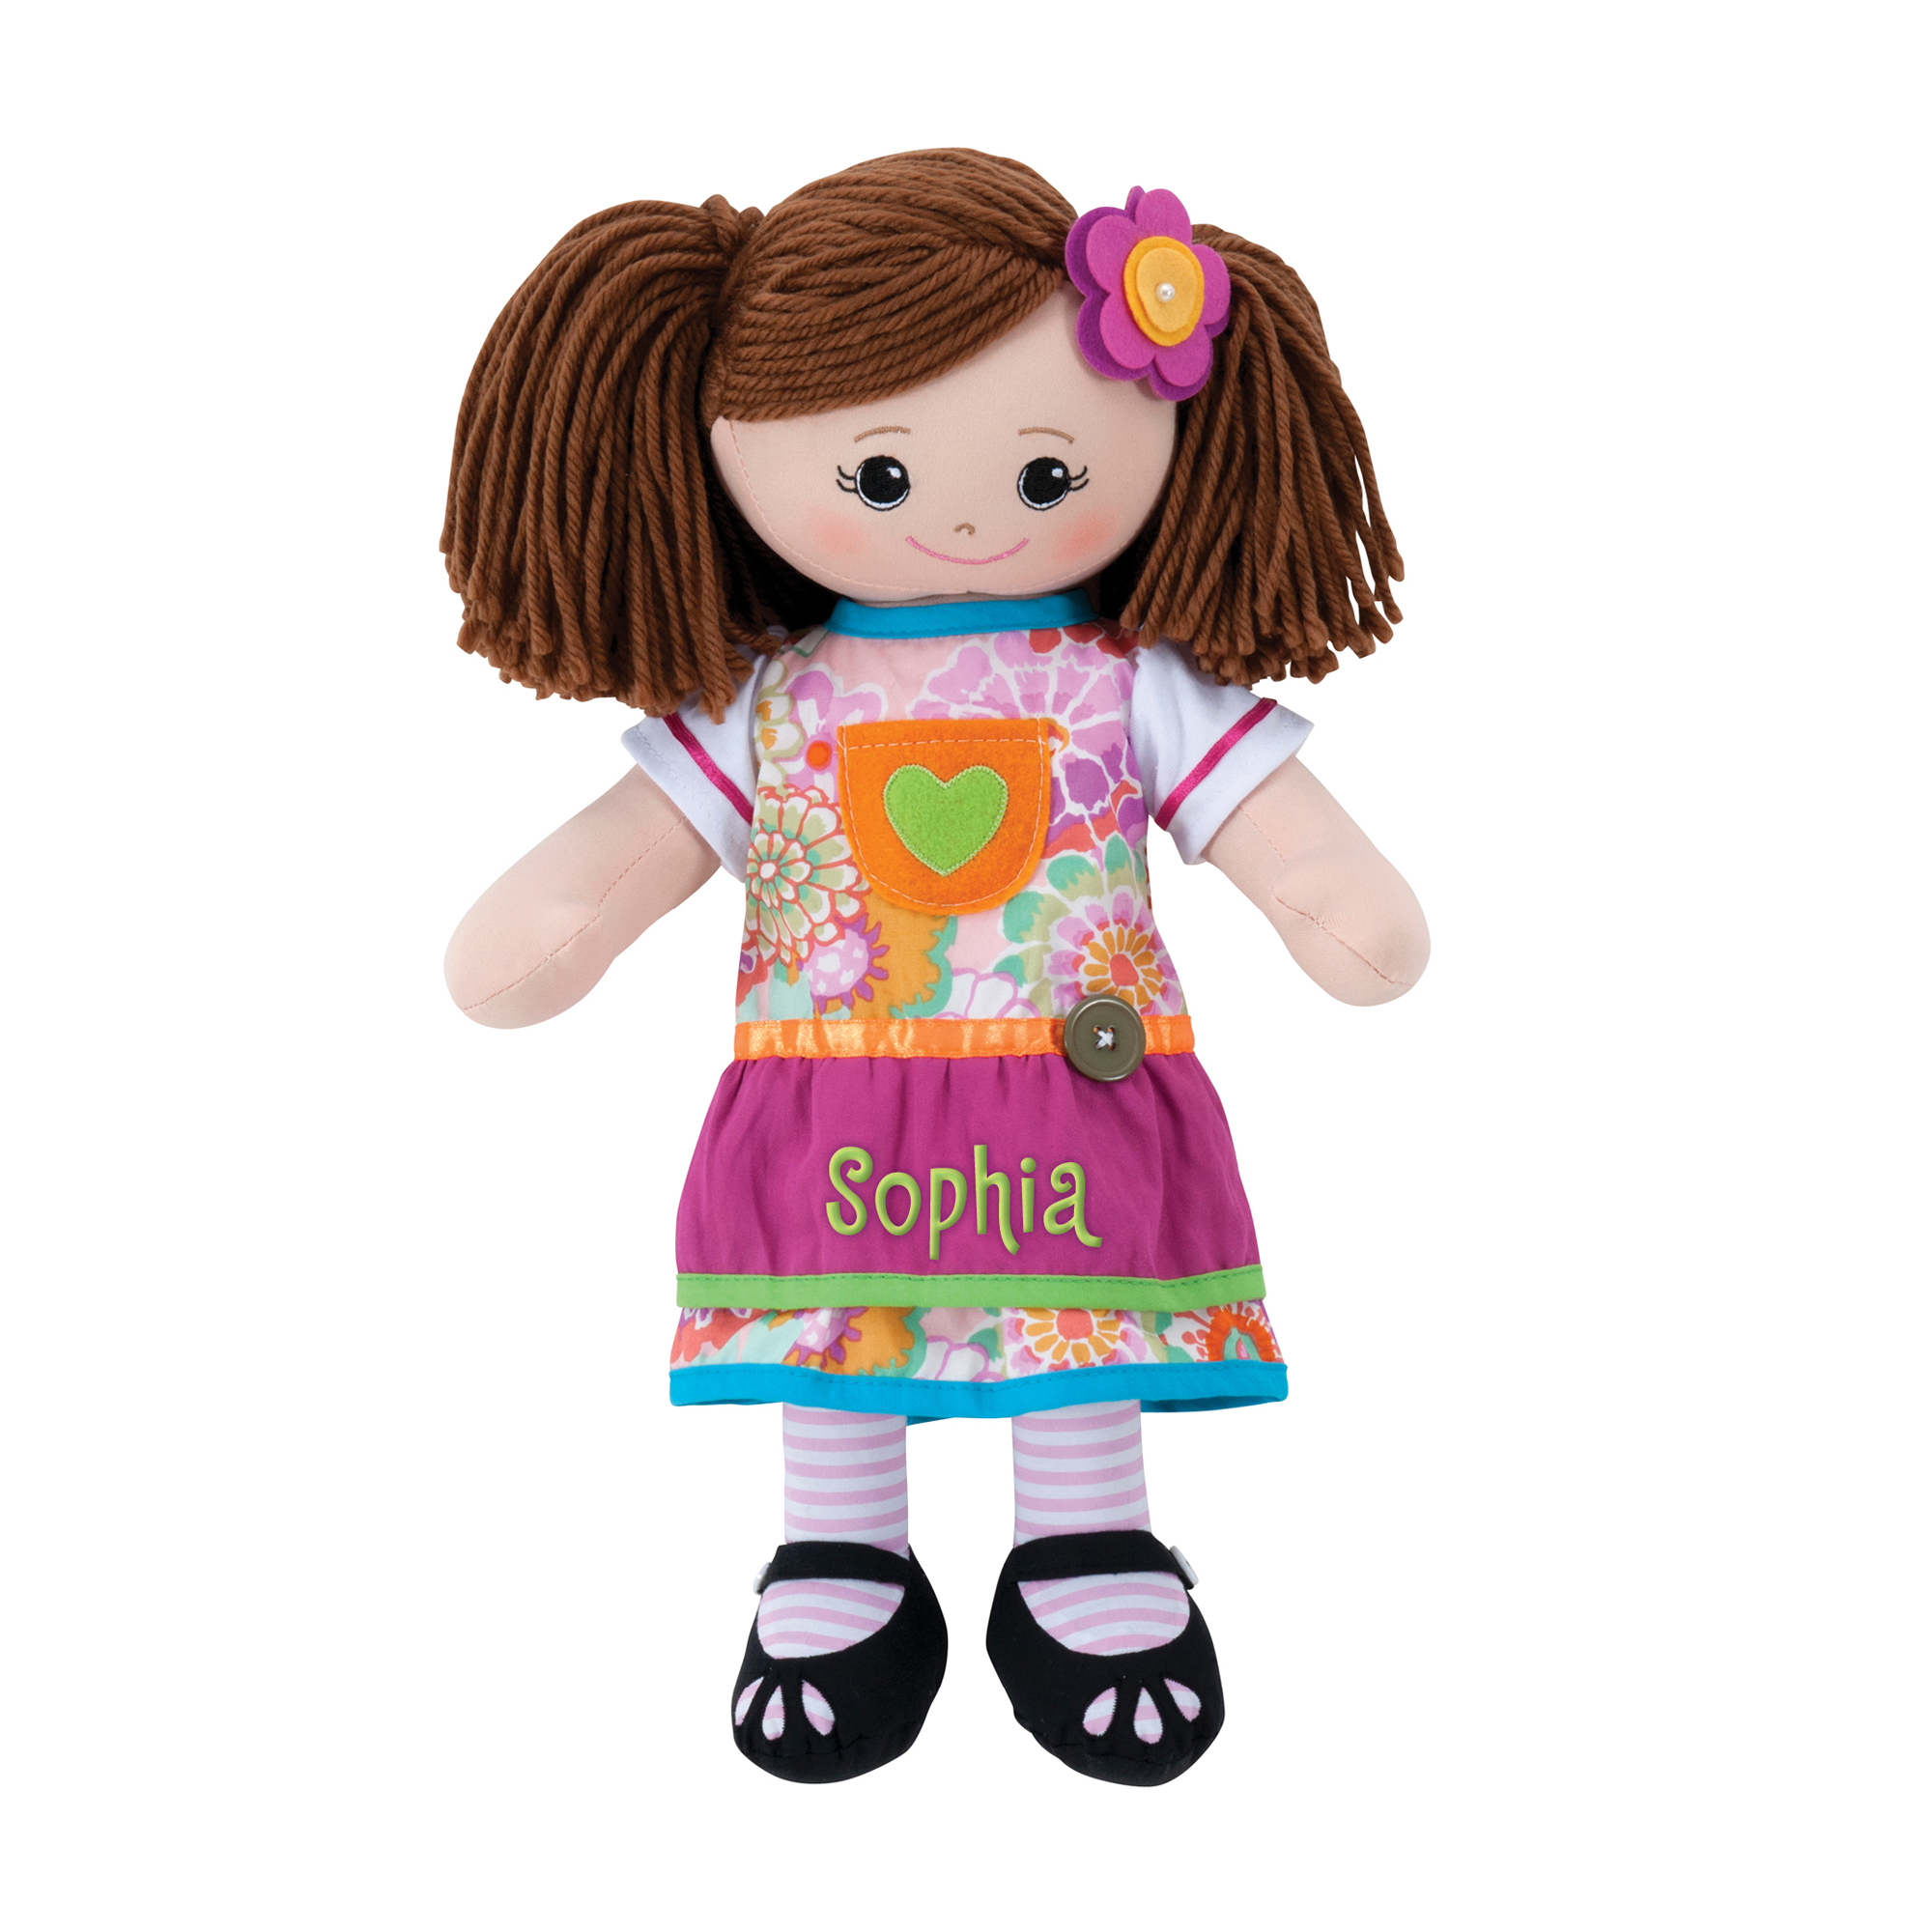 Personalized Brunette Doll with Pink Apron Dress and Hair Clip